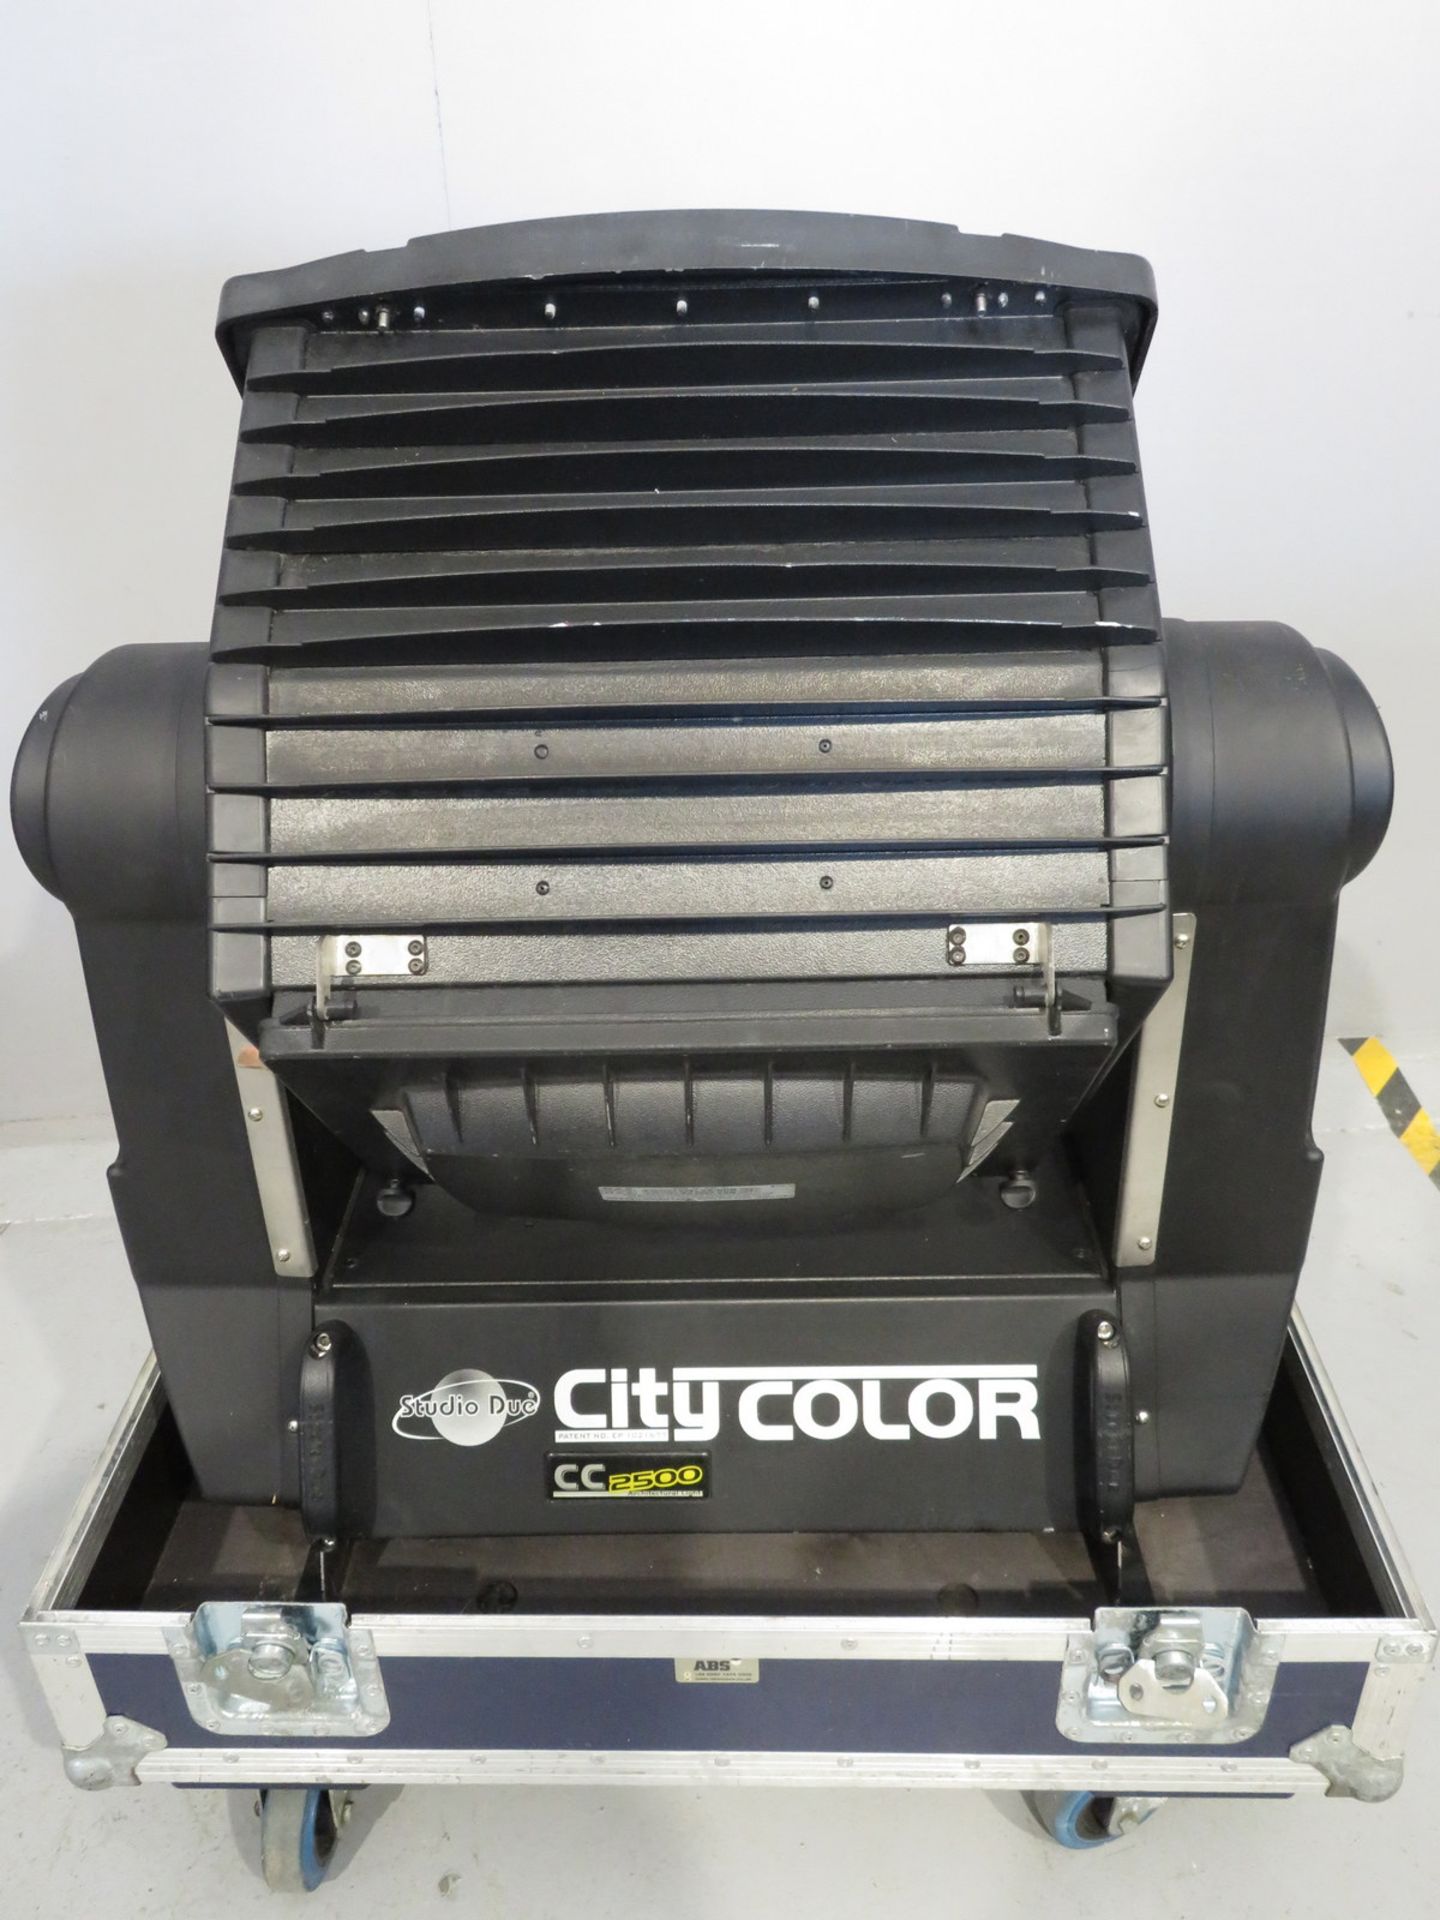 Studio Due City Colour 2500 Wash in flightcase. Working condition. Hours: 1279. - Image 7 of 9